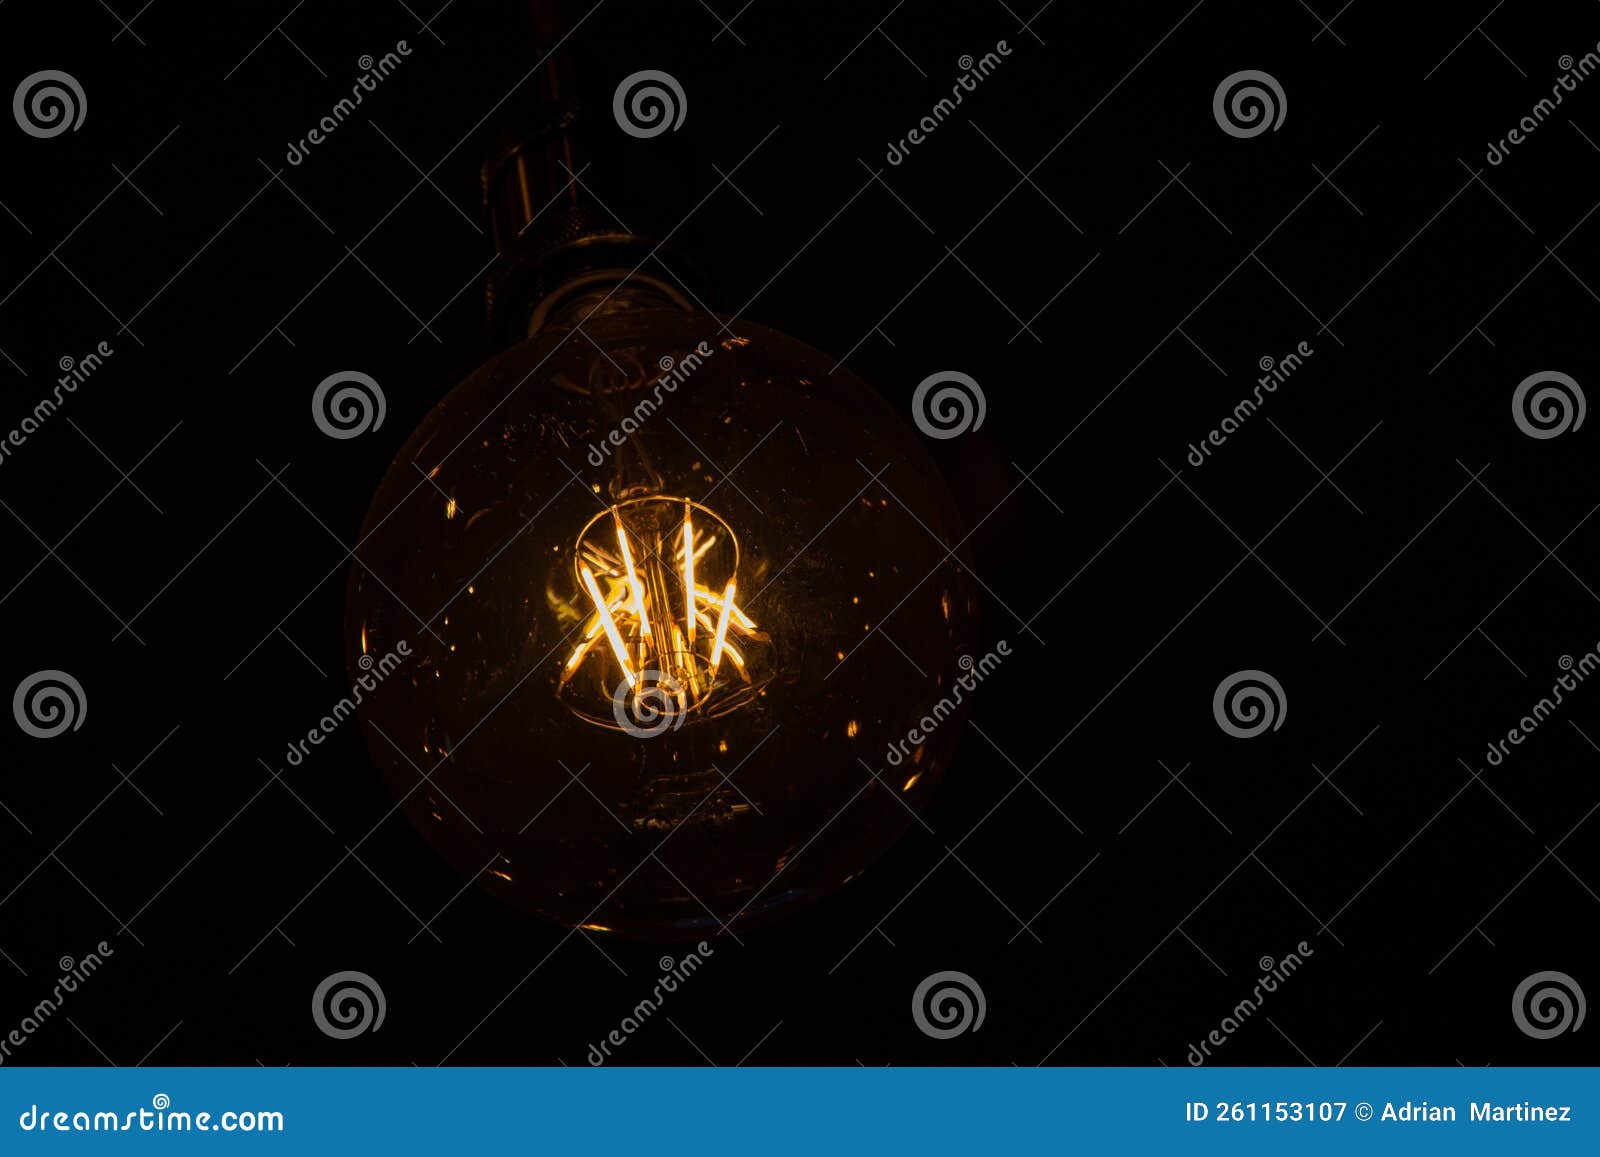 vintage worm lamp lighting and black background photography